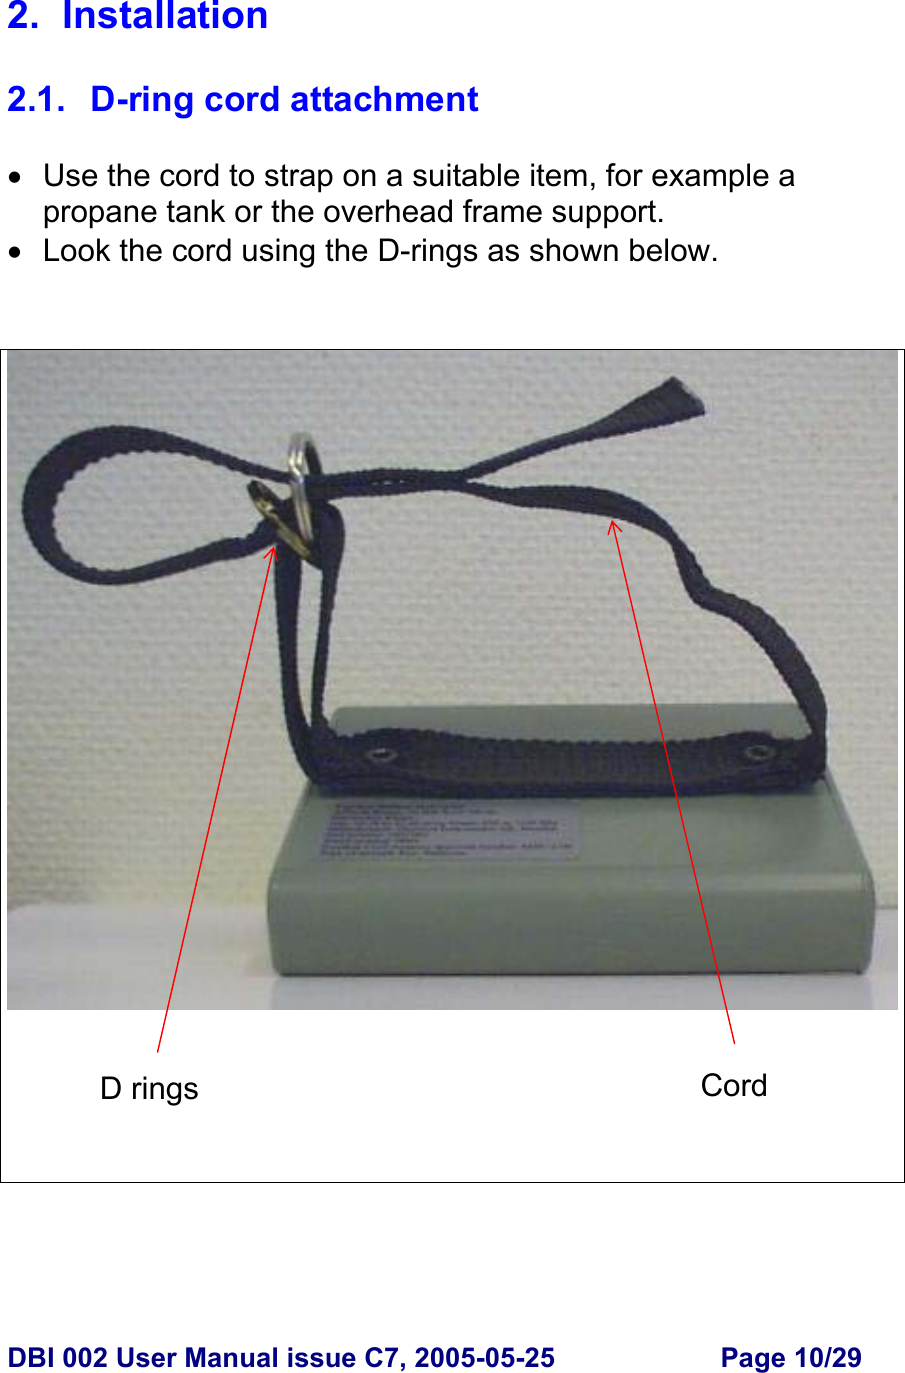  DBI 002 User Manual issue C7, 2005-05-25  Page 10/29  2. Installation  2.1.  D-ring cord attachment  •  Use the cord to strap on a suitable item, for example a propane tank or the overhead frame support. •  Look the cord using the D-rings as shown below.      D rings  Cord 